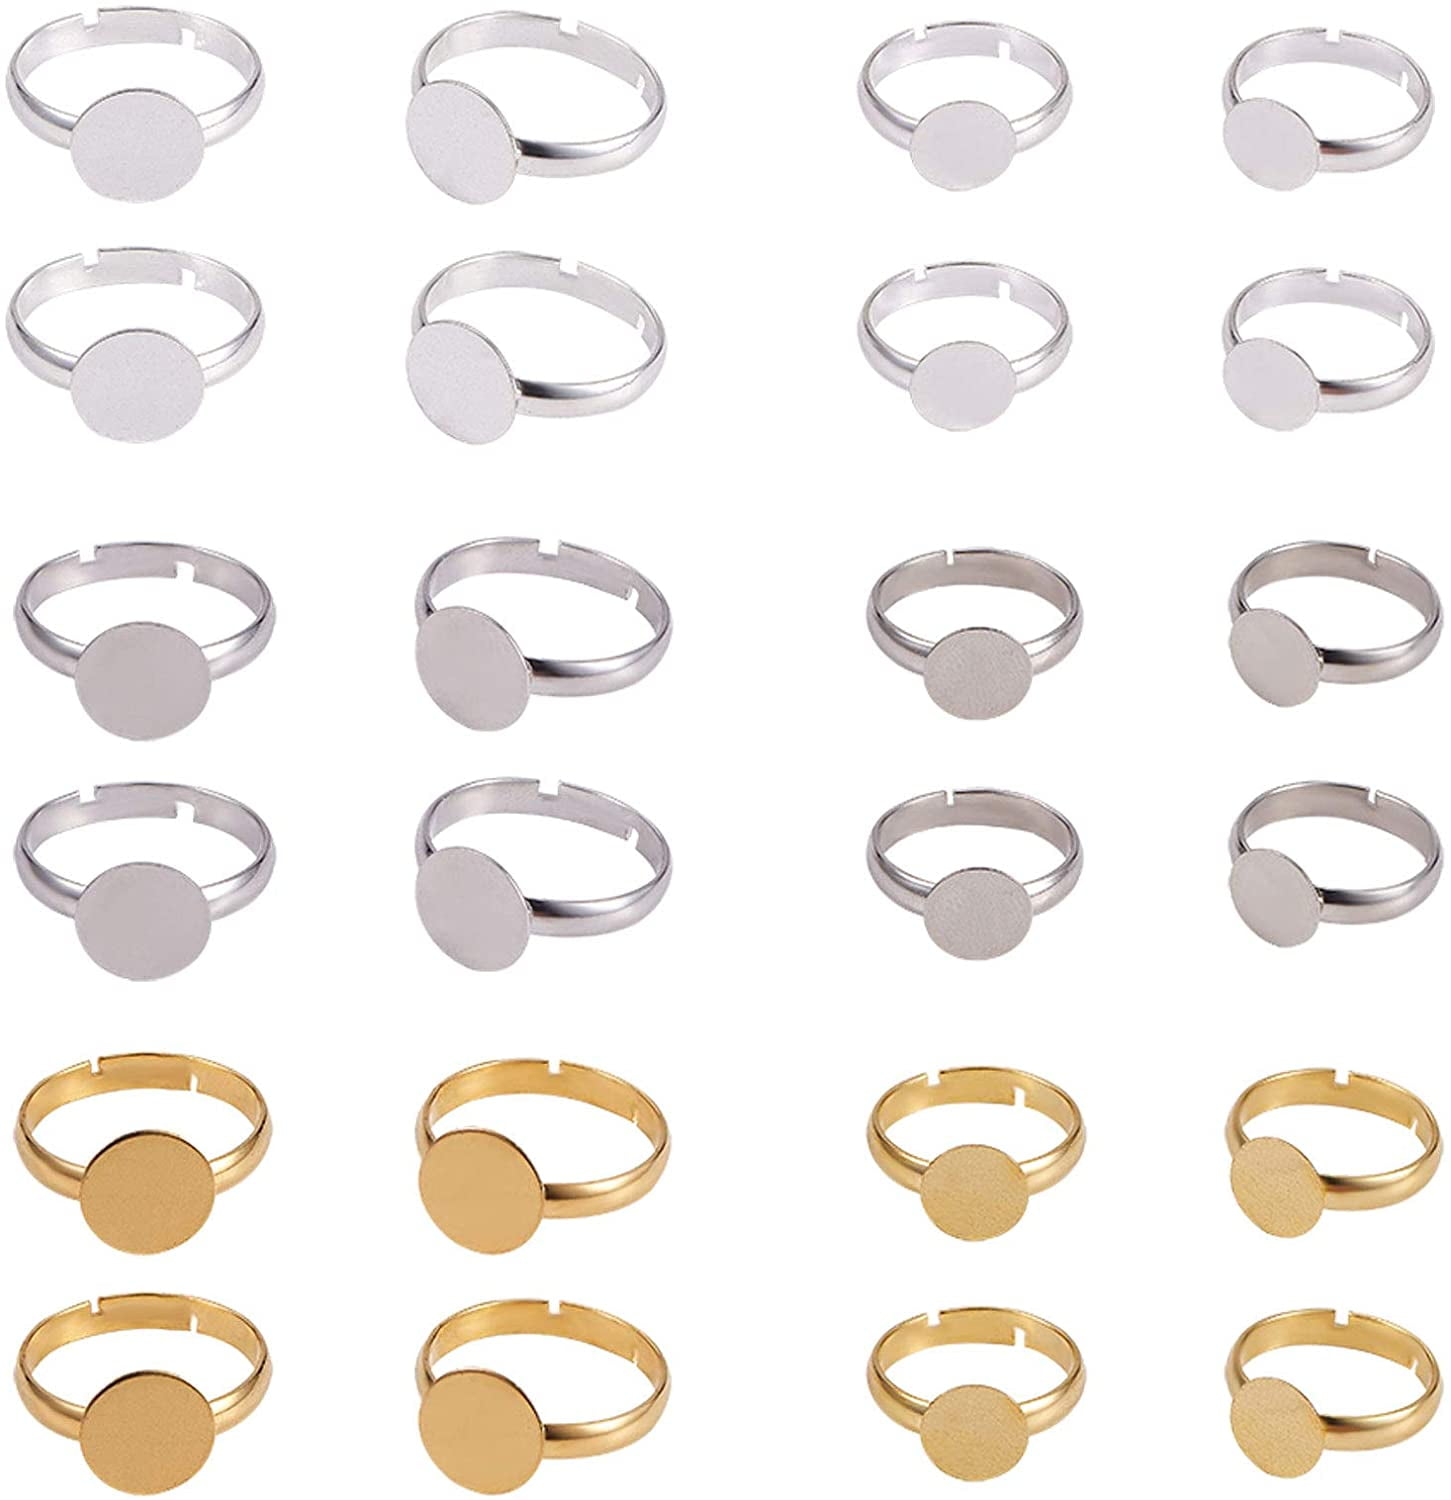 25 Adjustable Ring Blanks gold tone diy jewelry finding supplies 10mm pad 